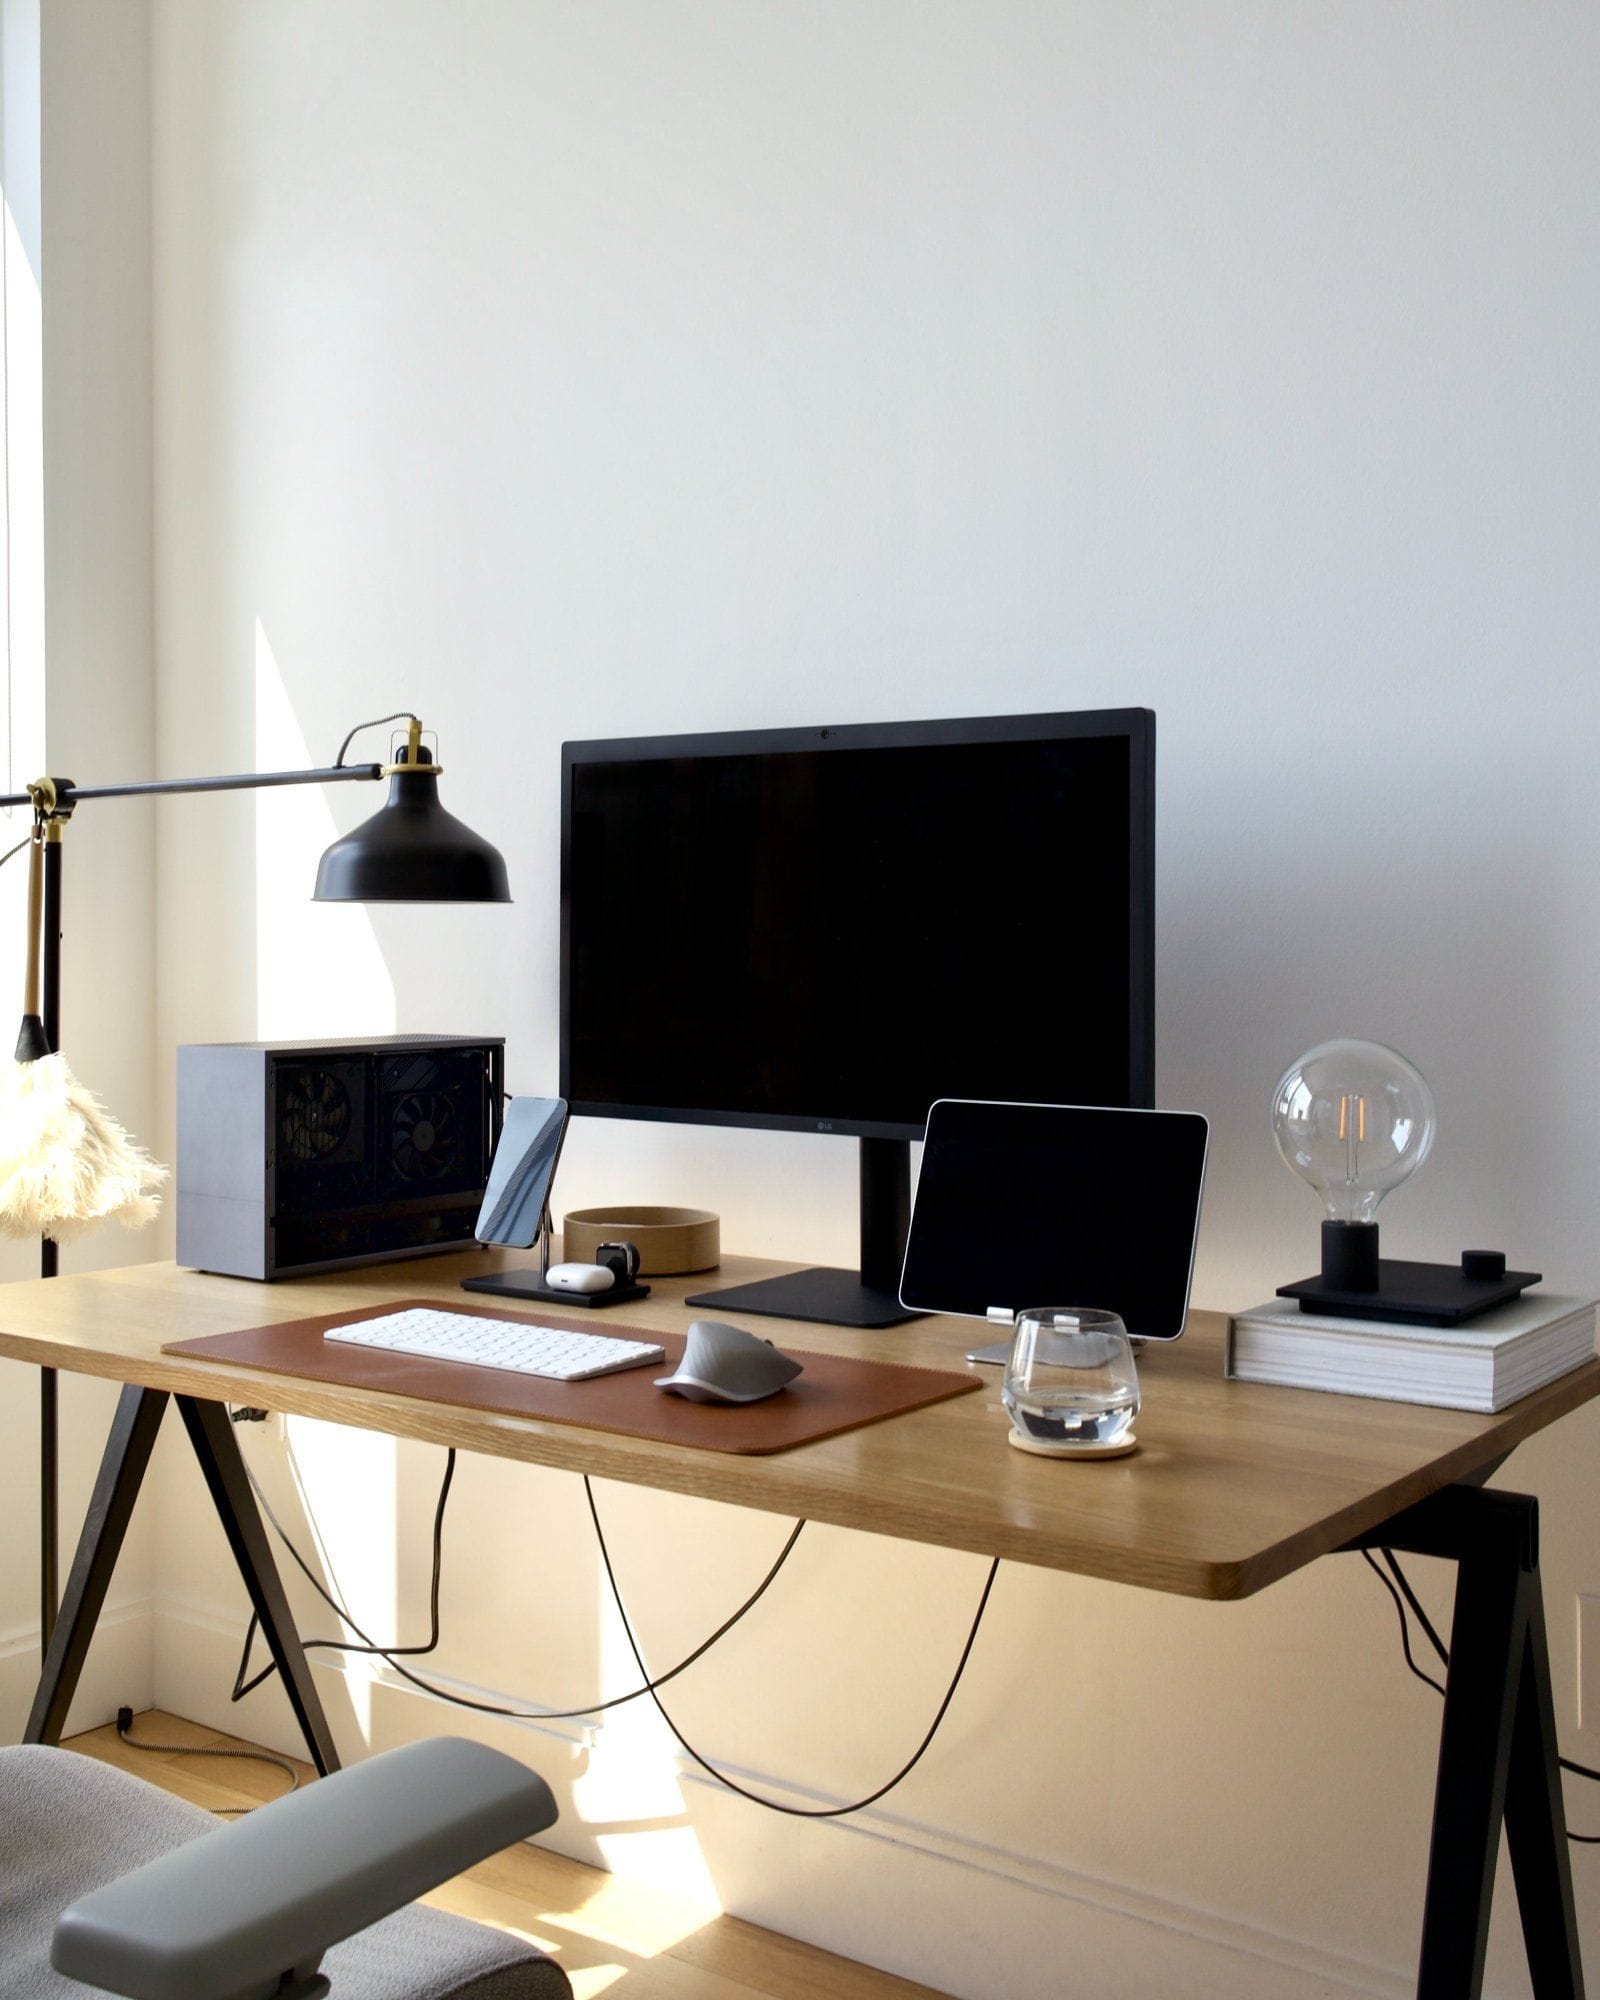 A minimalistic desk setup with a modern LG monitor, tablet stand, keyboard on a leather mat, designer lamp, and decorative items, including books and a glass orb, all bathed in natural light